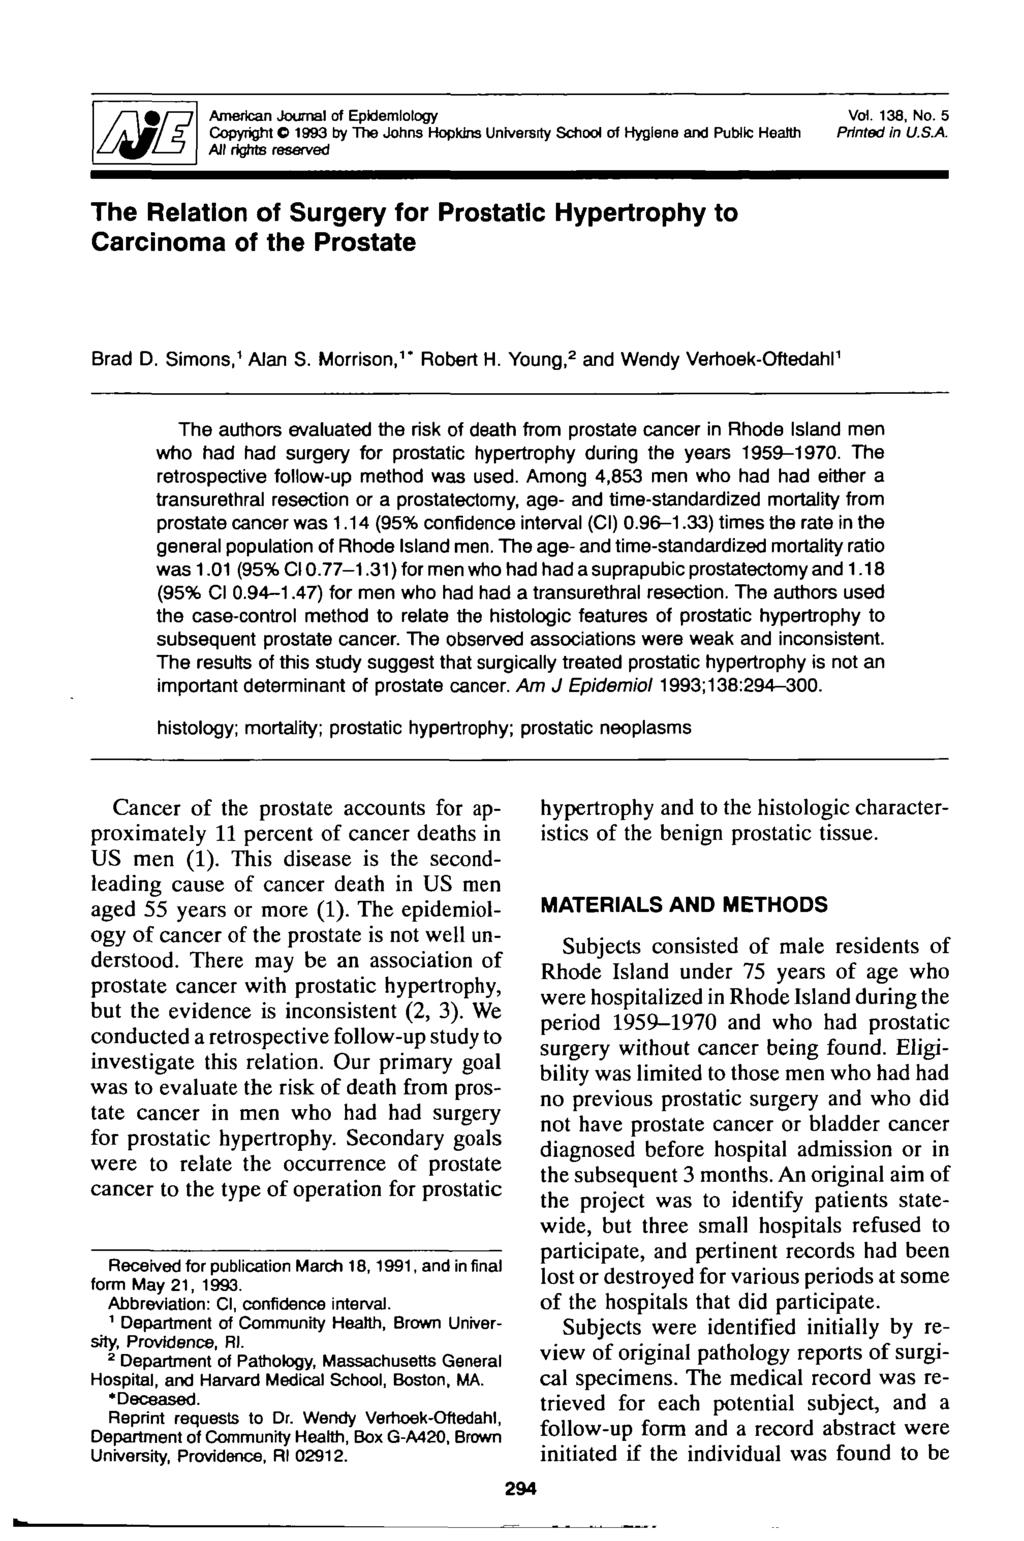 American Journal of Epidemiology Vol. 138, No. 5 Copyright C 1993 by The Johns Hopkins University School of Hygiene and Public Health Printed in U.SA.